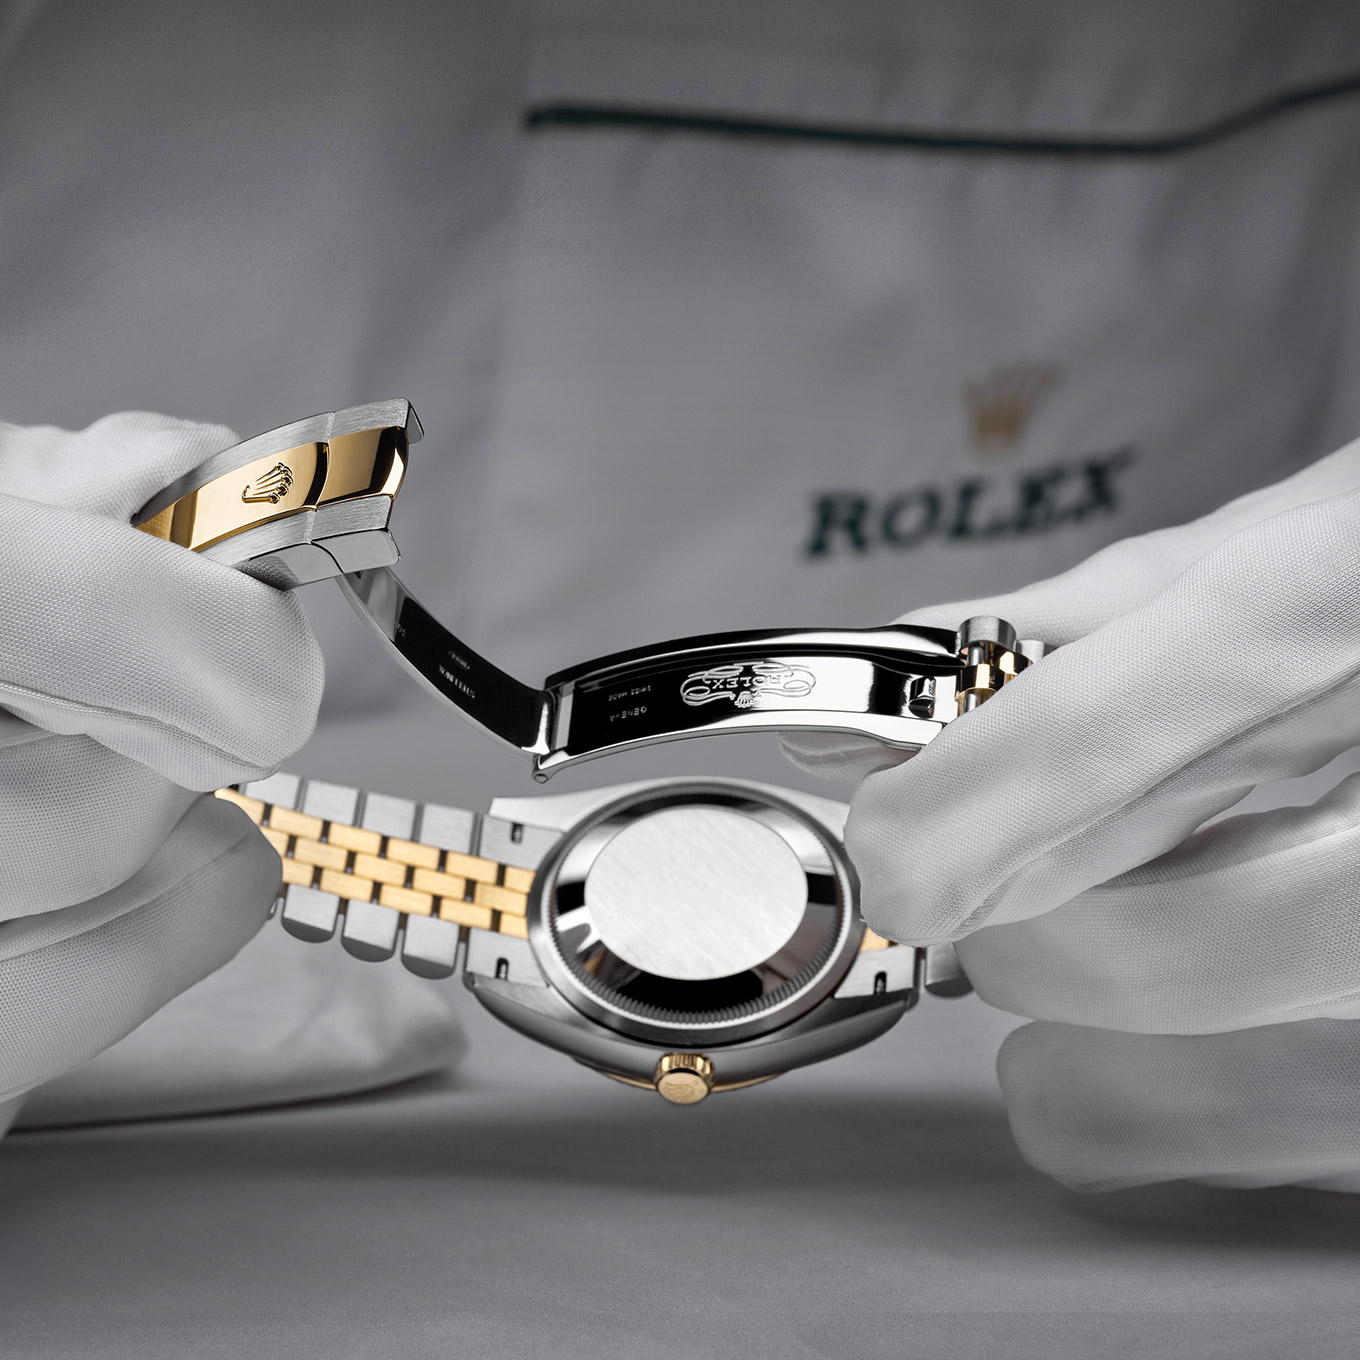 Rolex servicing at Lasker Jewelers in Rochester, MN